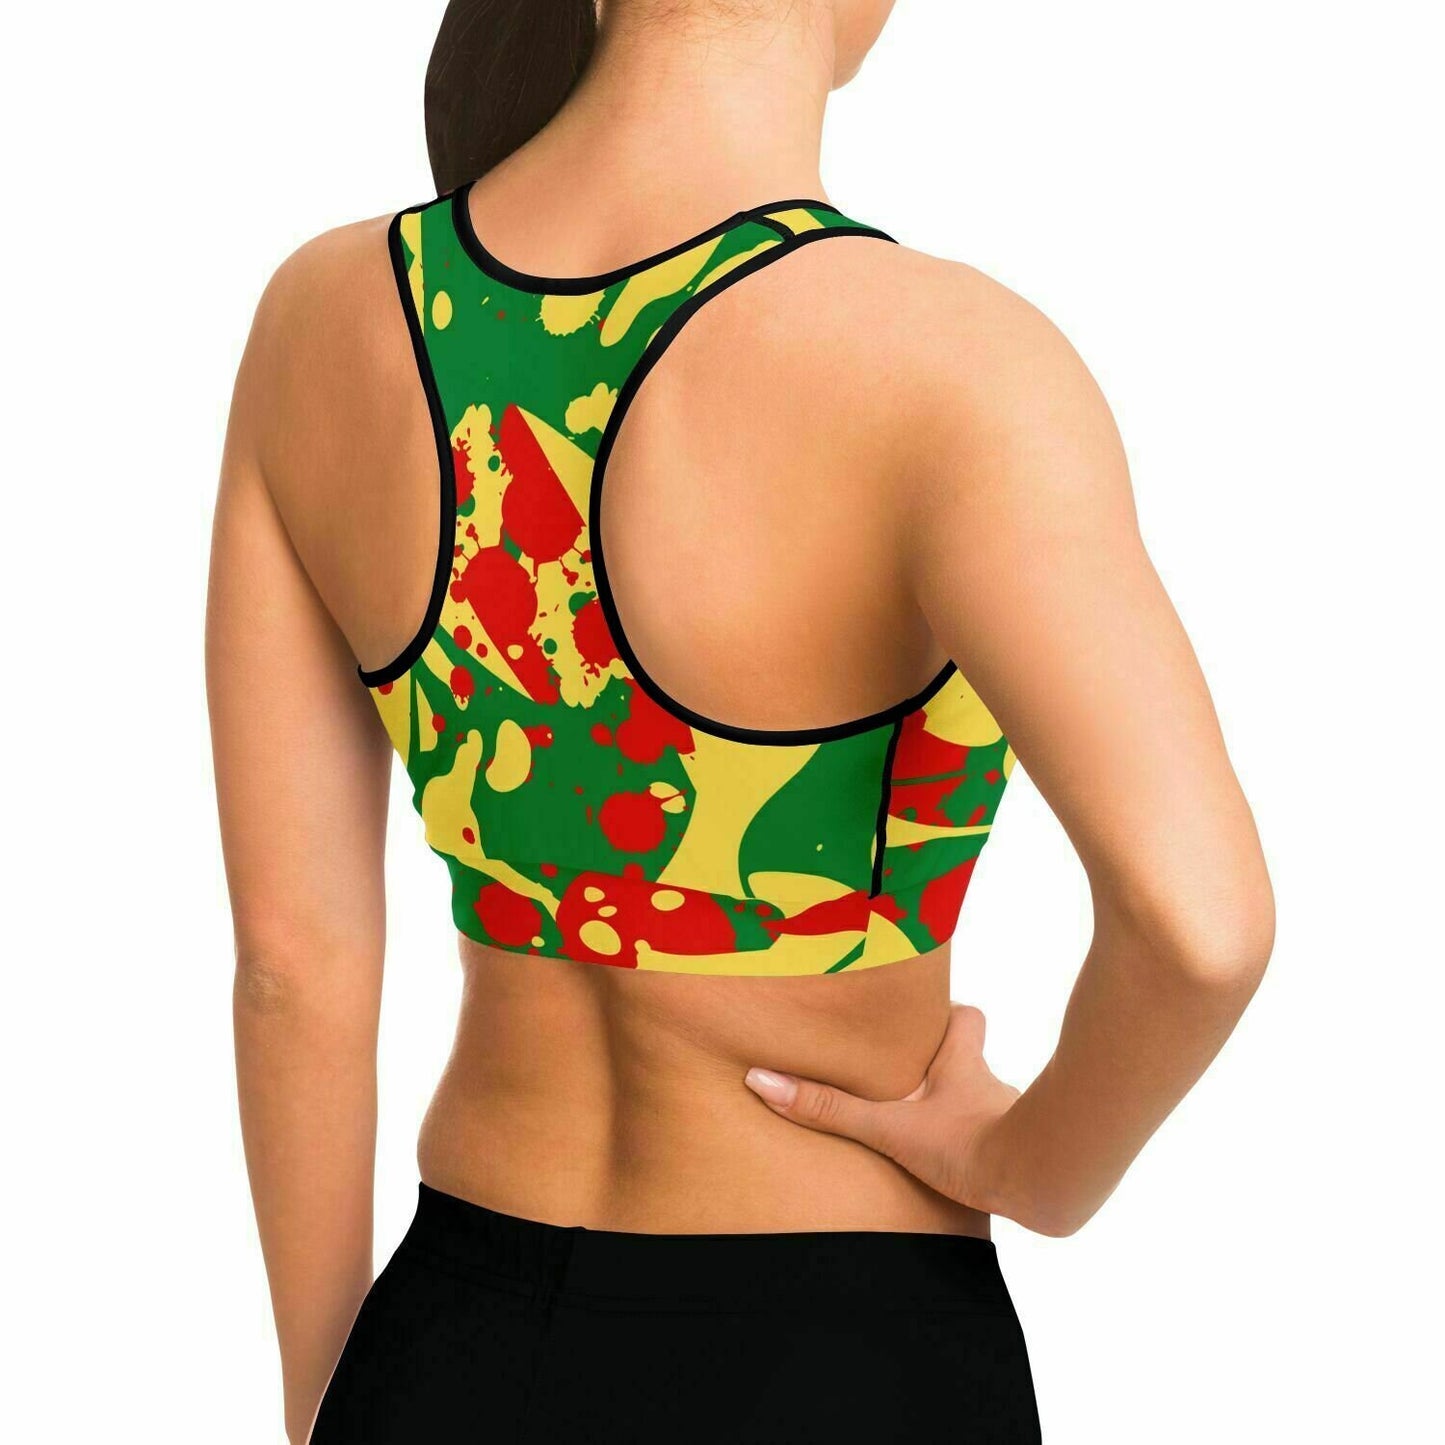 Rasta High Waisted Yoga Leggings  and Sports Bra Set Women's Thick Tights Reggae Casual Gym Gear Red Green Yellow Active or Lounge Wear